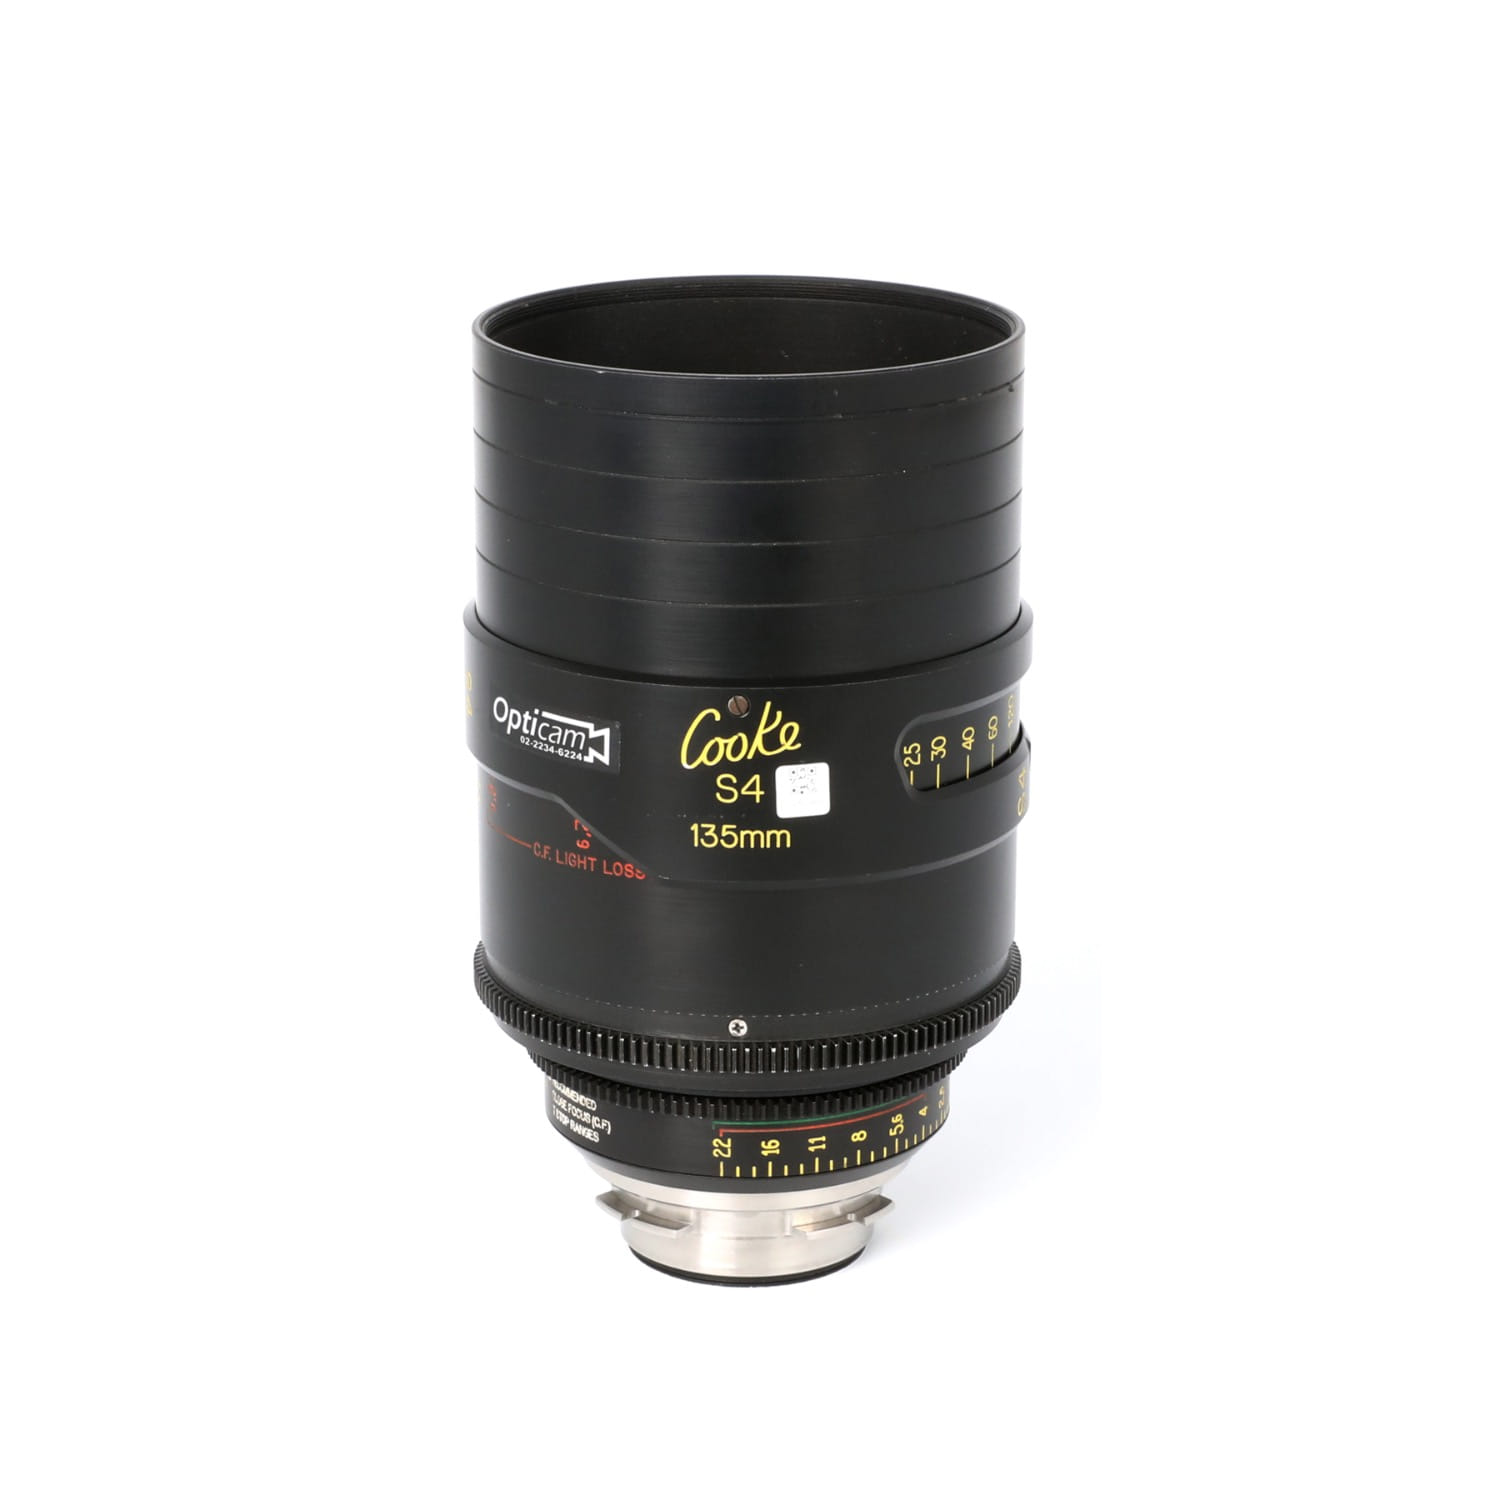 Cooke S4 135mm